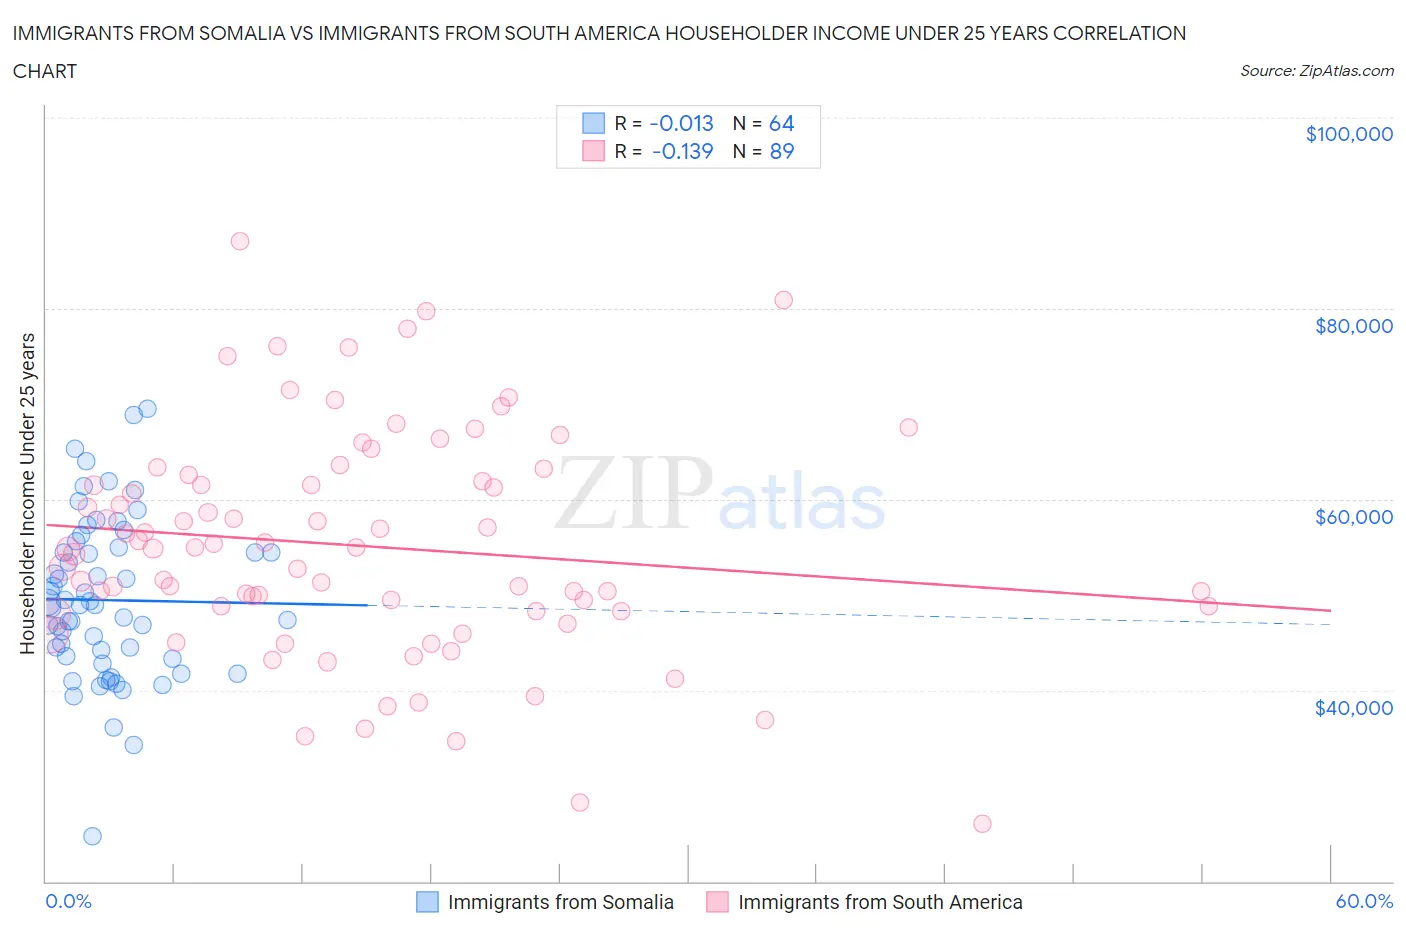 Immigrants from Somalia vs Immigrants from South America Householder Income Under 25 years